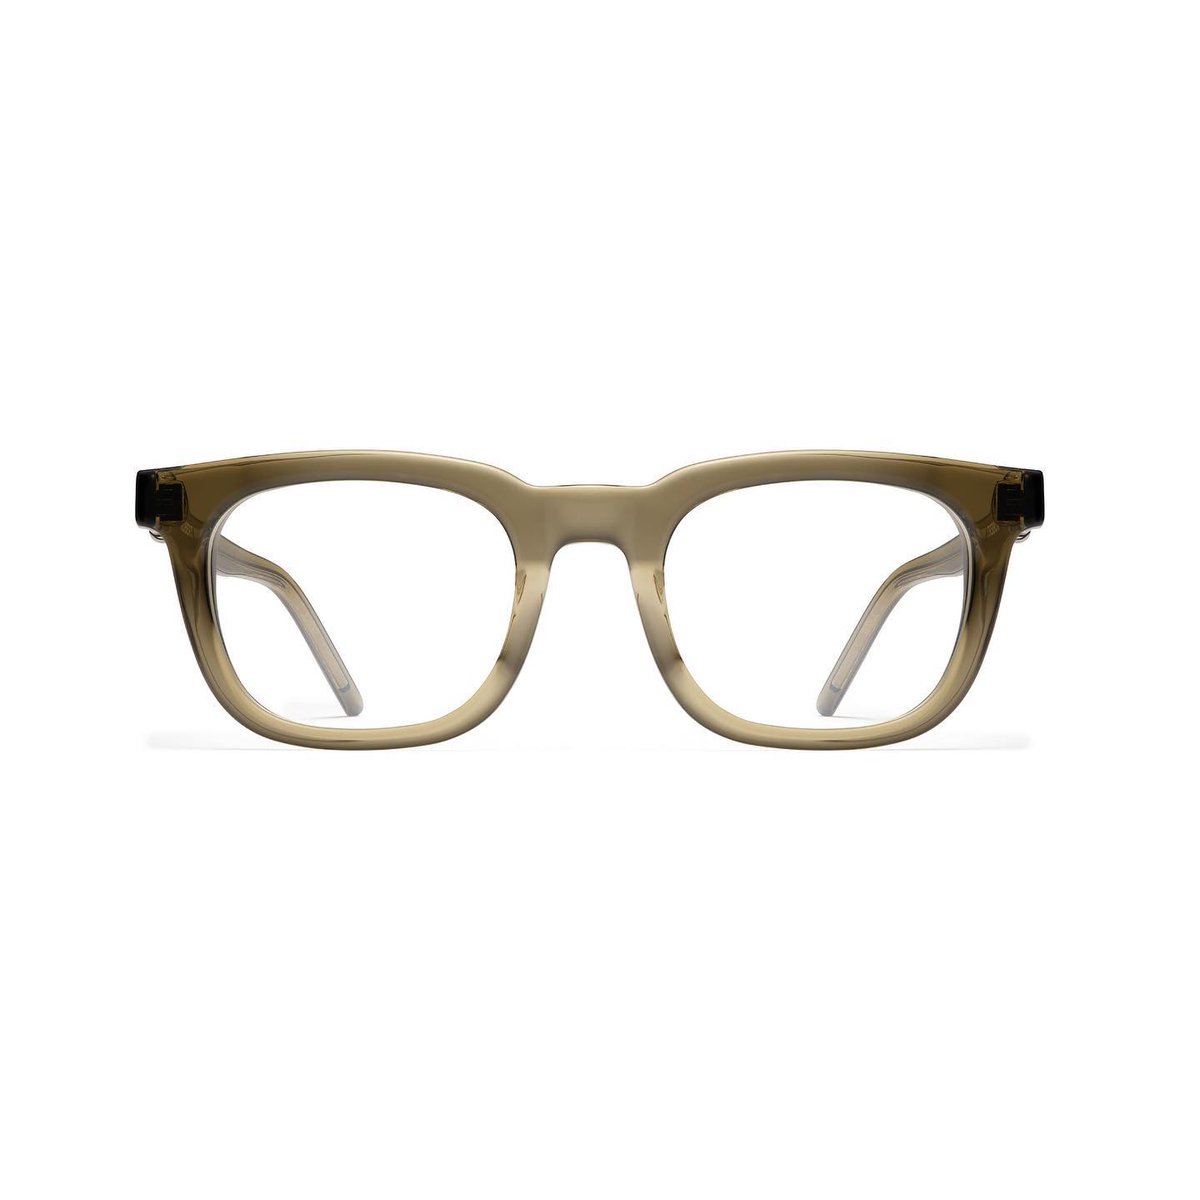 Robert Marc NYC frames are the perfect marriage of comfort and style. 

The NYC in the name underlines the powerful and enduring influence of New York style over the brand. 

Visit DickStoryOptical.com to find the perfect Robert Marc NYC frames for you!

#shoplocalokc #okc